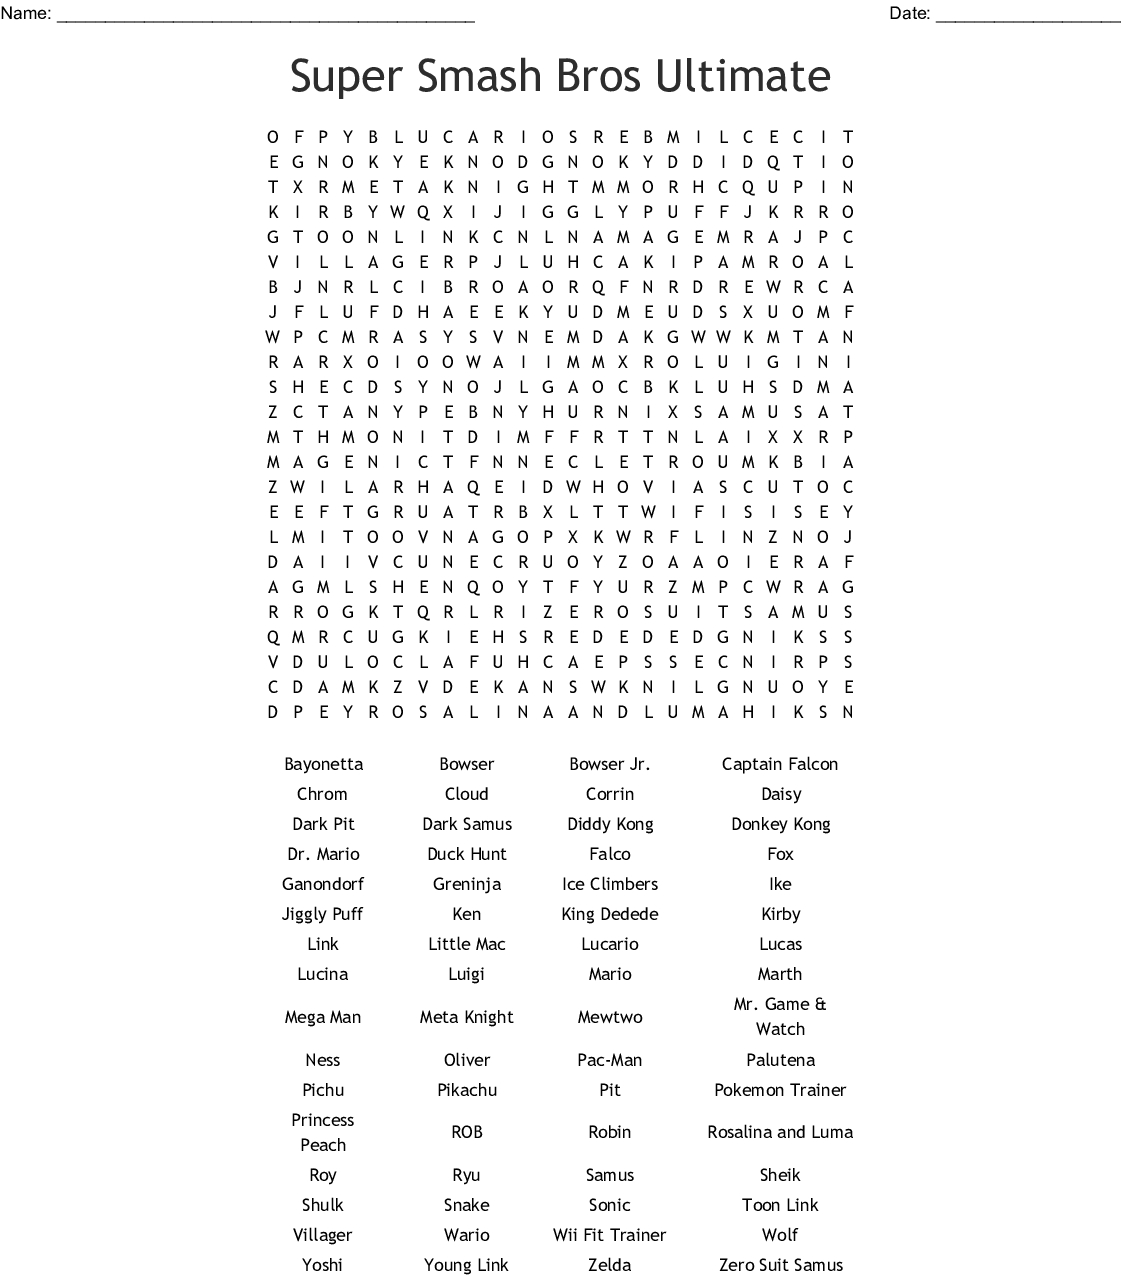 Super Smash Bros Ultimate Characters Word Search - Wordmint